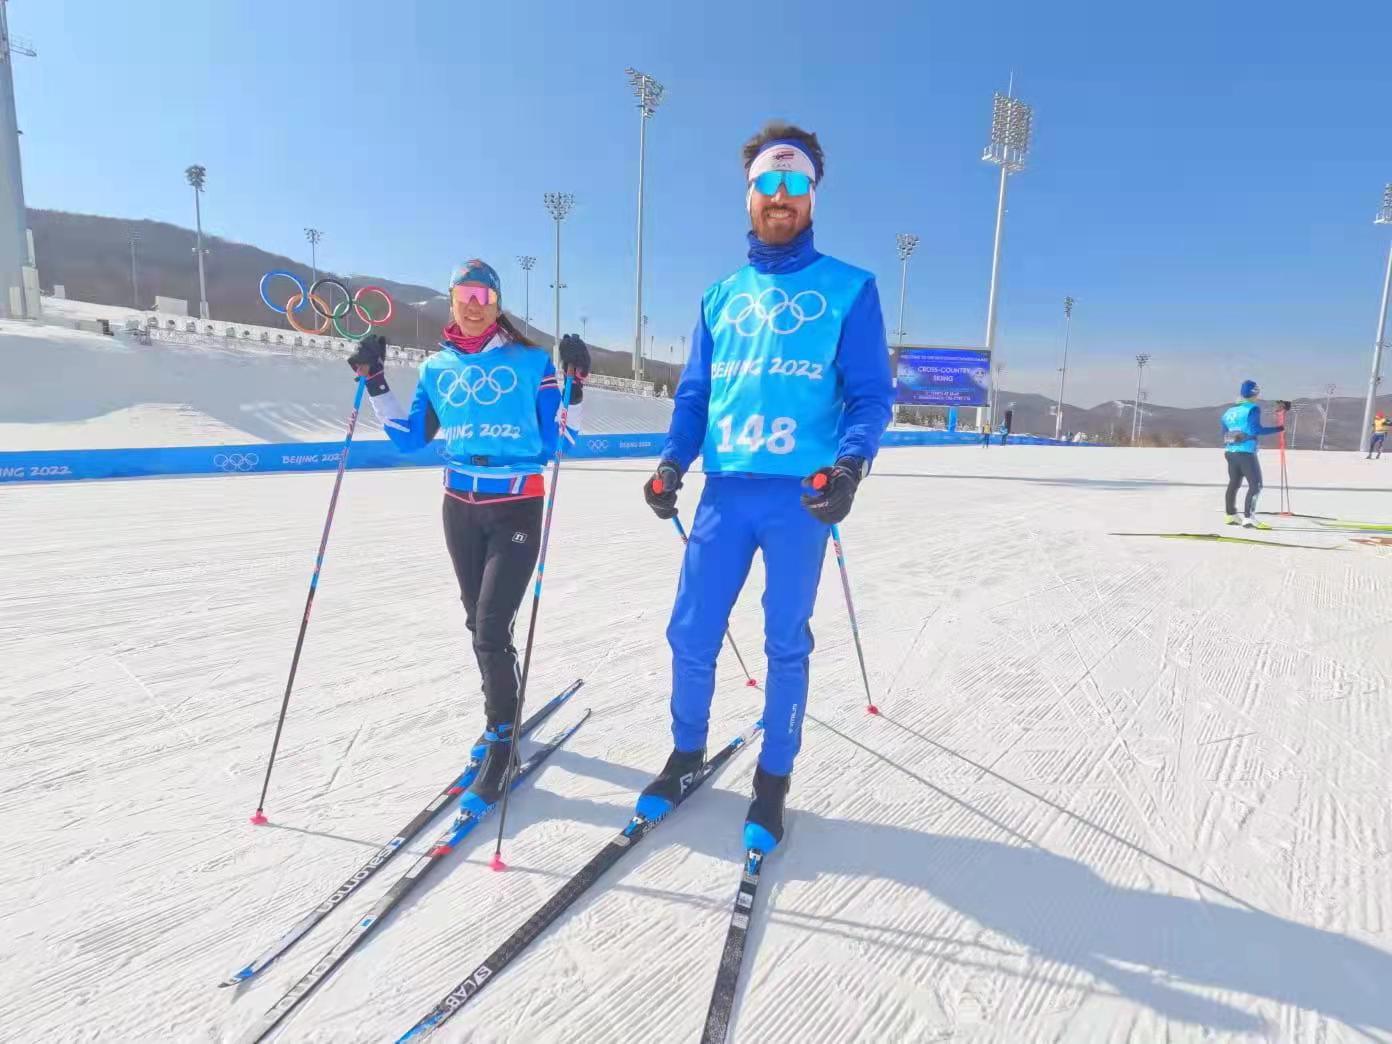 Mark Chanloung and Karen Chanloung in Beijing 2022 Winter Olympics Village